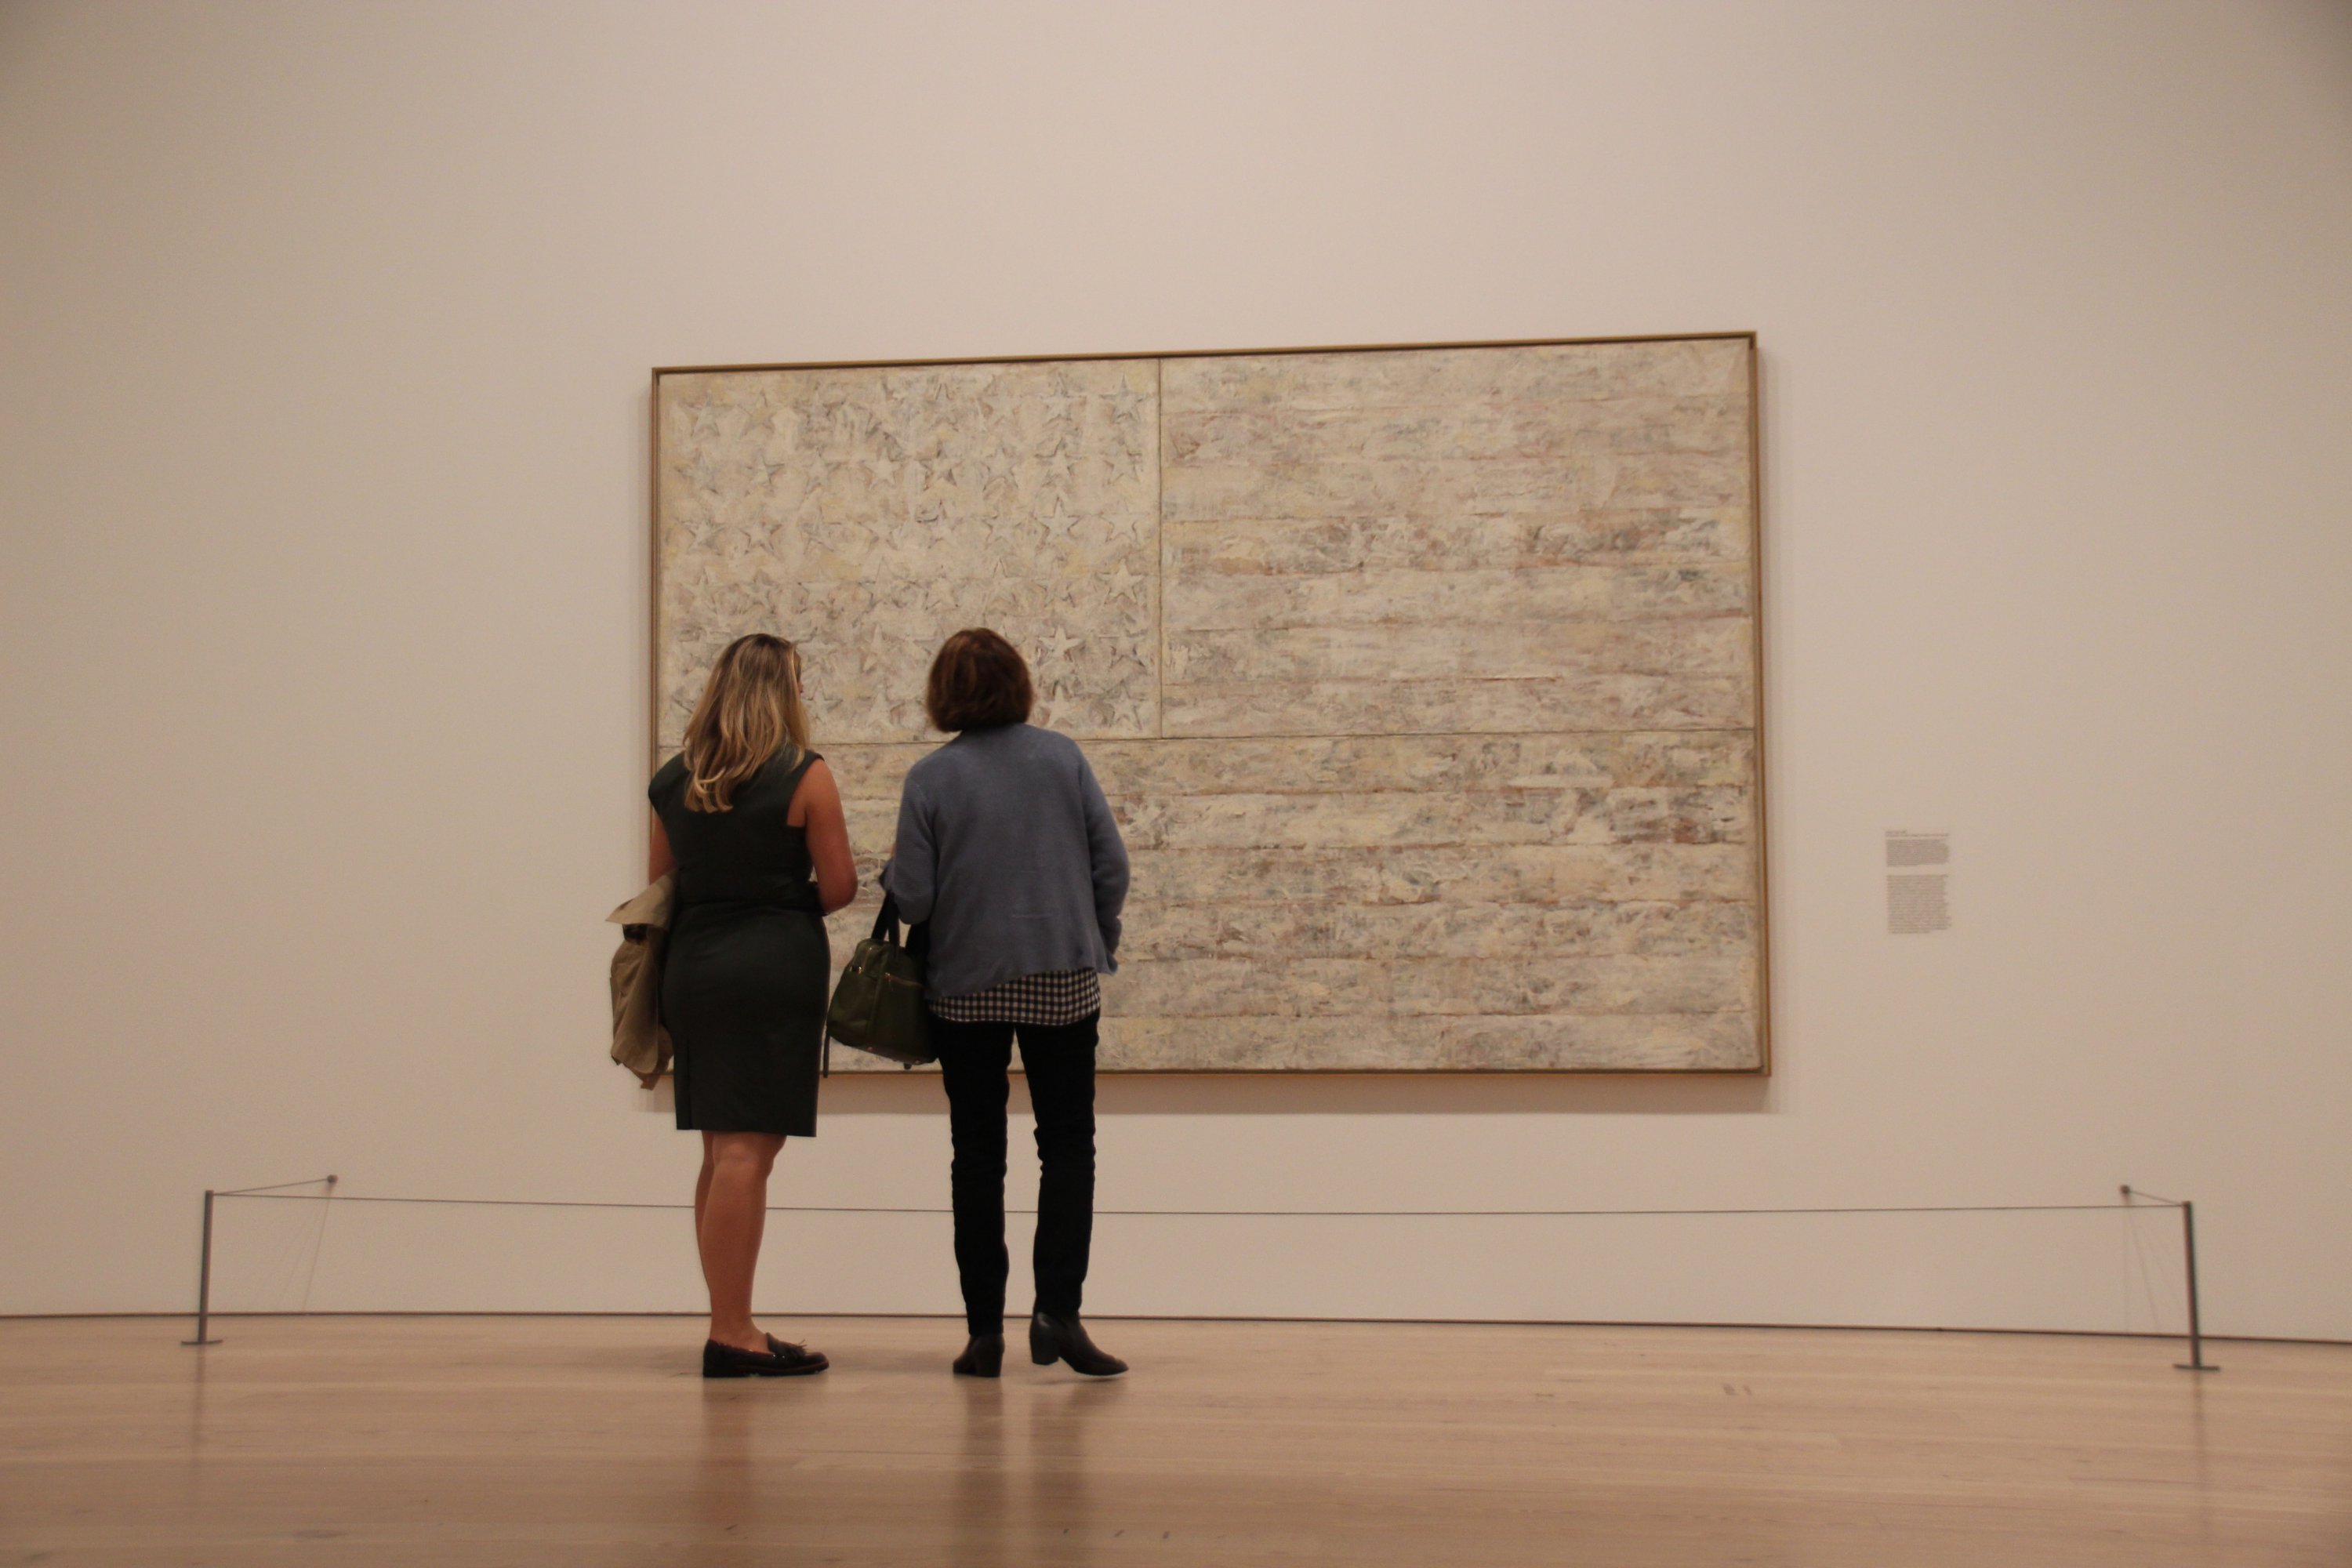 "White Flag" is one of the works on display as part of a dual exhibition in New York and Philadelphia of U.S. artist Jasper Johns